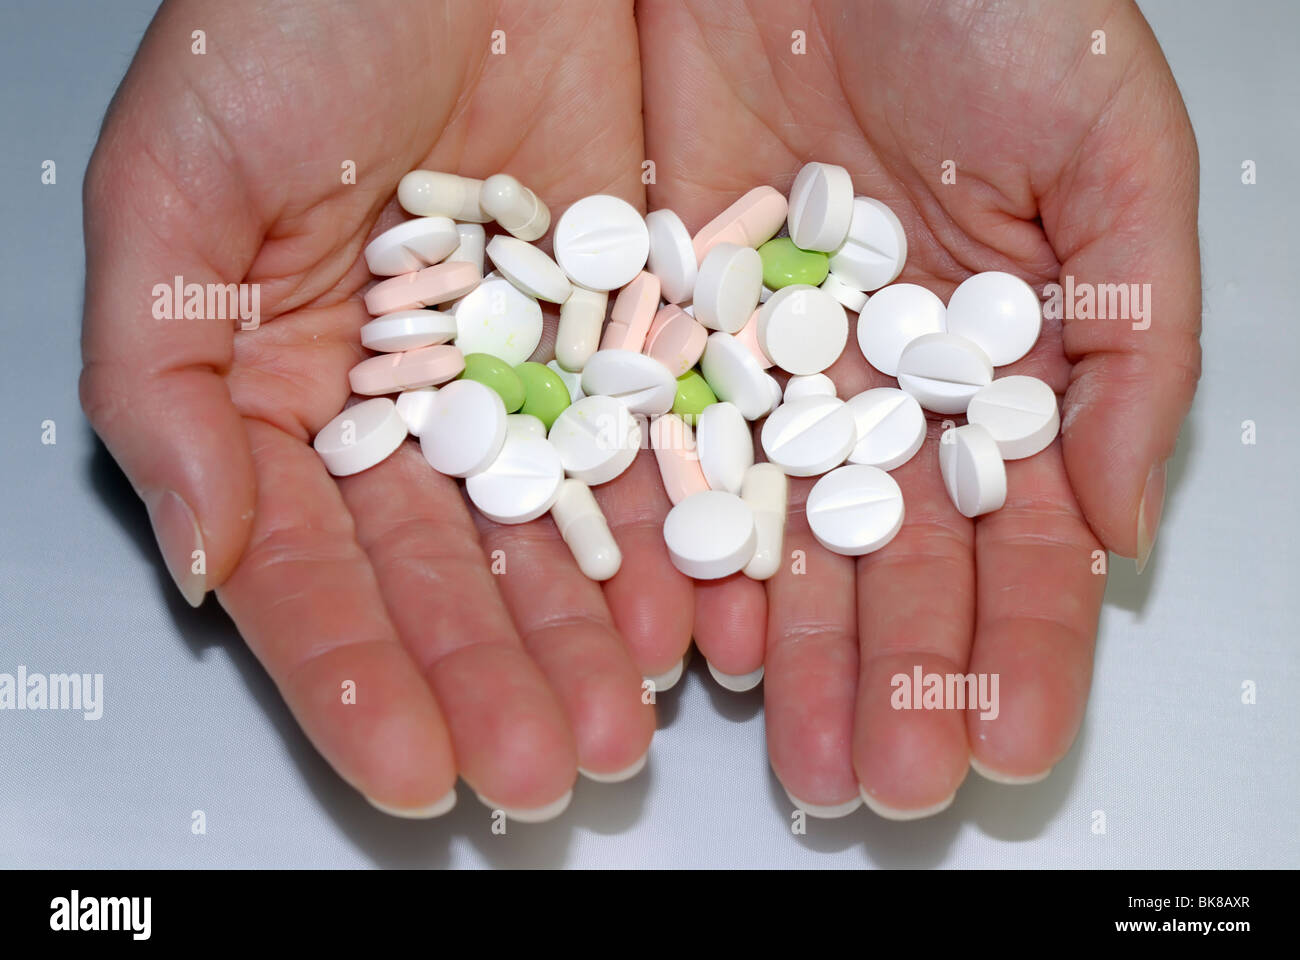 Tablets and pills on hands Stock Photo